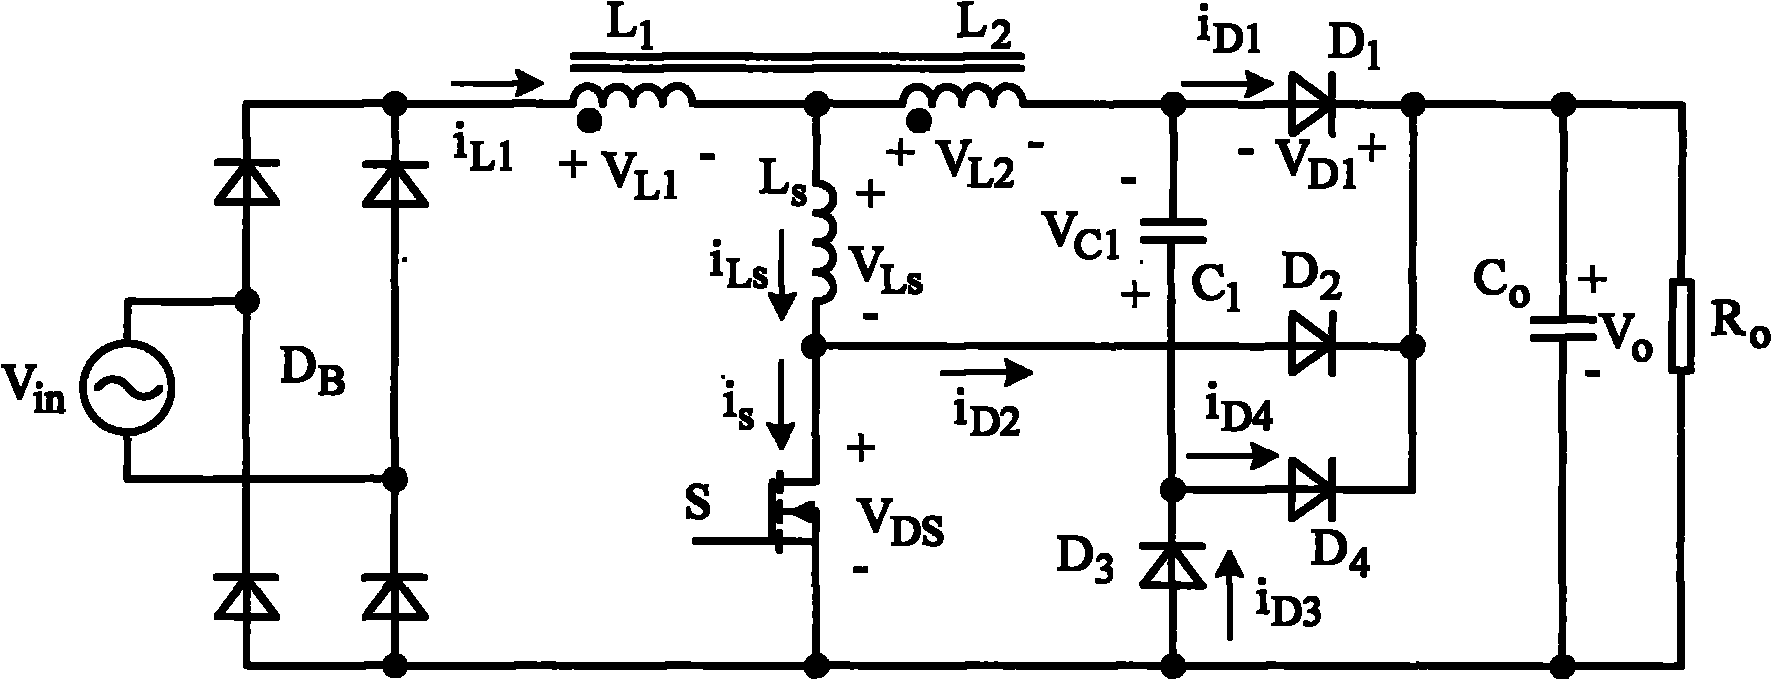 Power factor correction converter based on magnetic coupling lossless buffer circuit